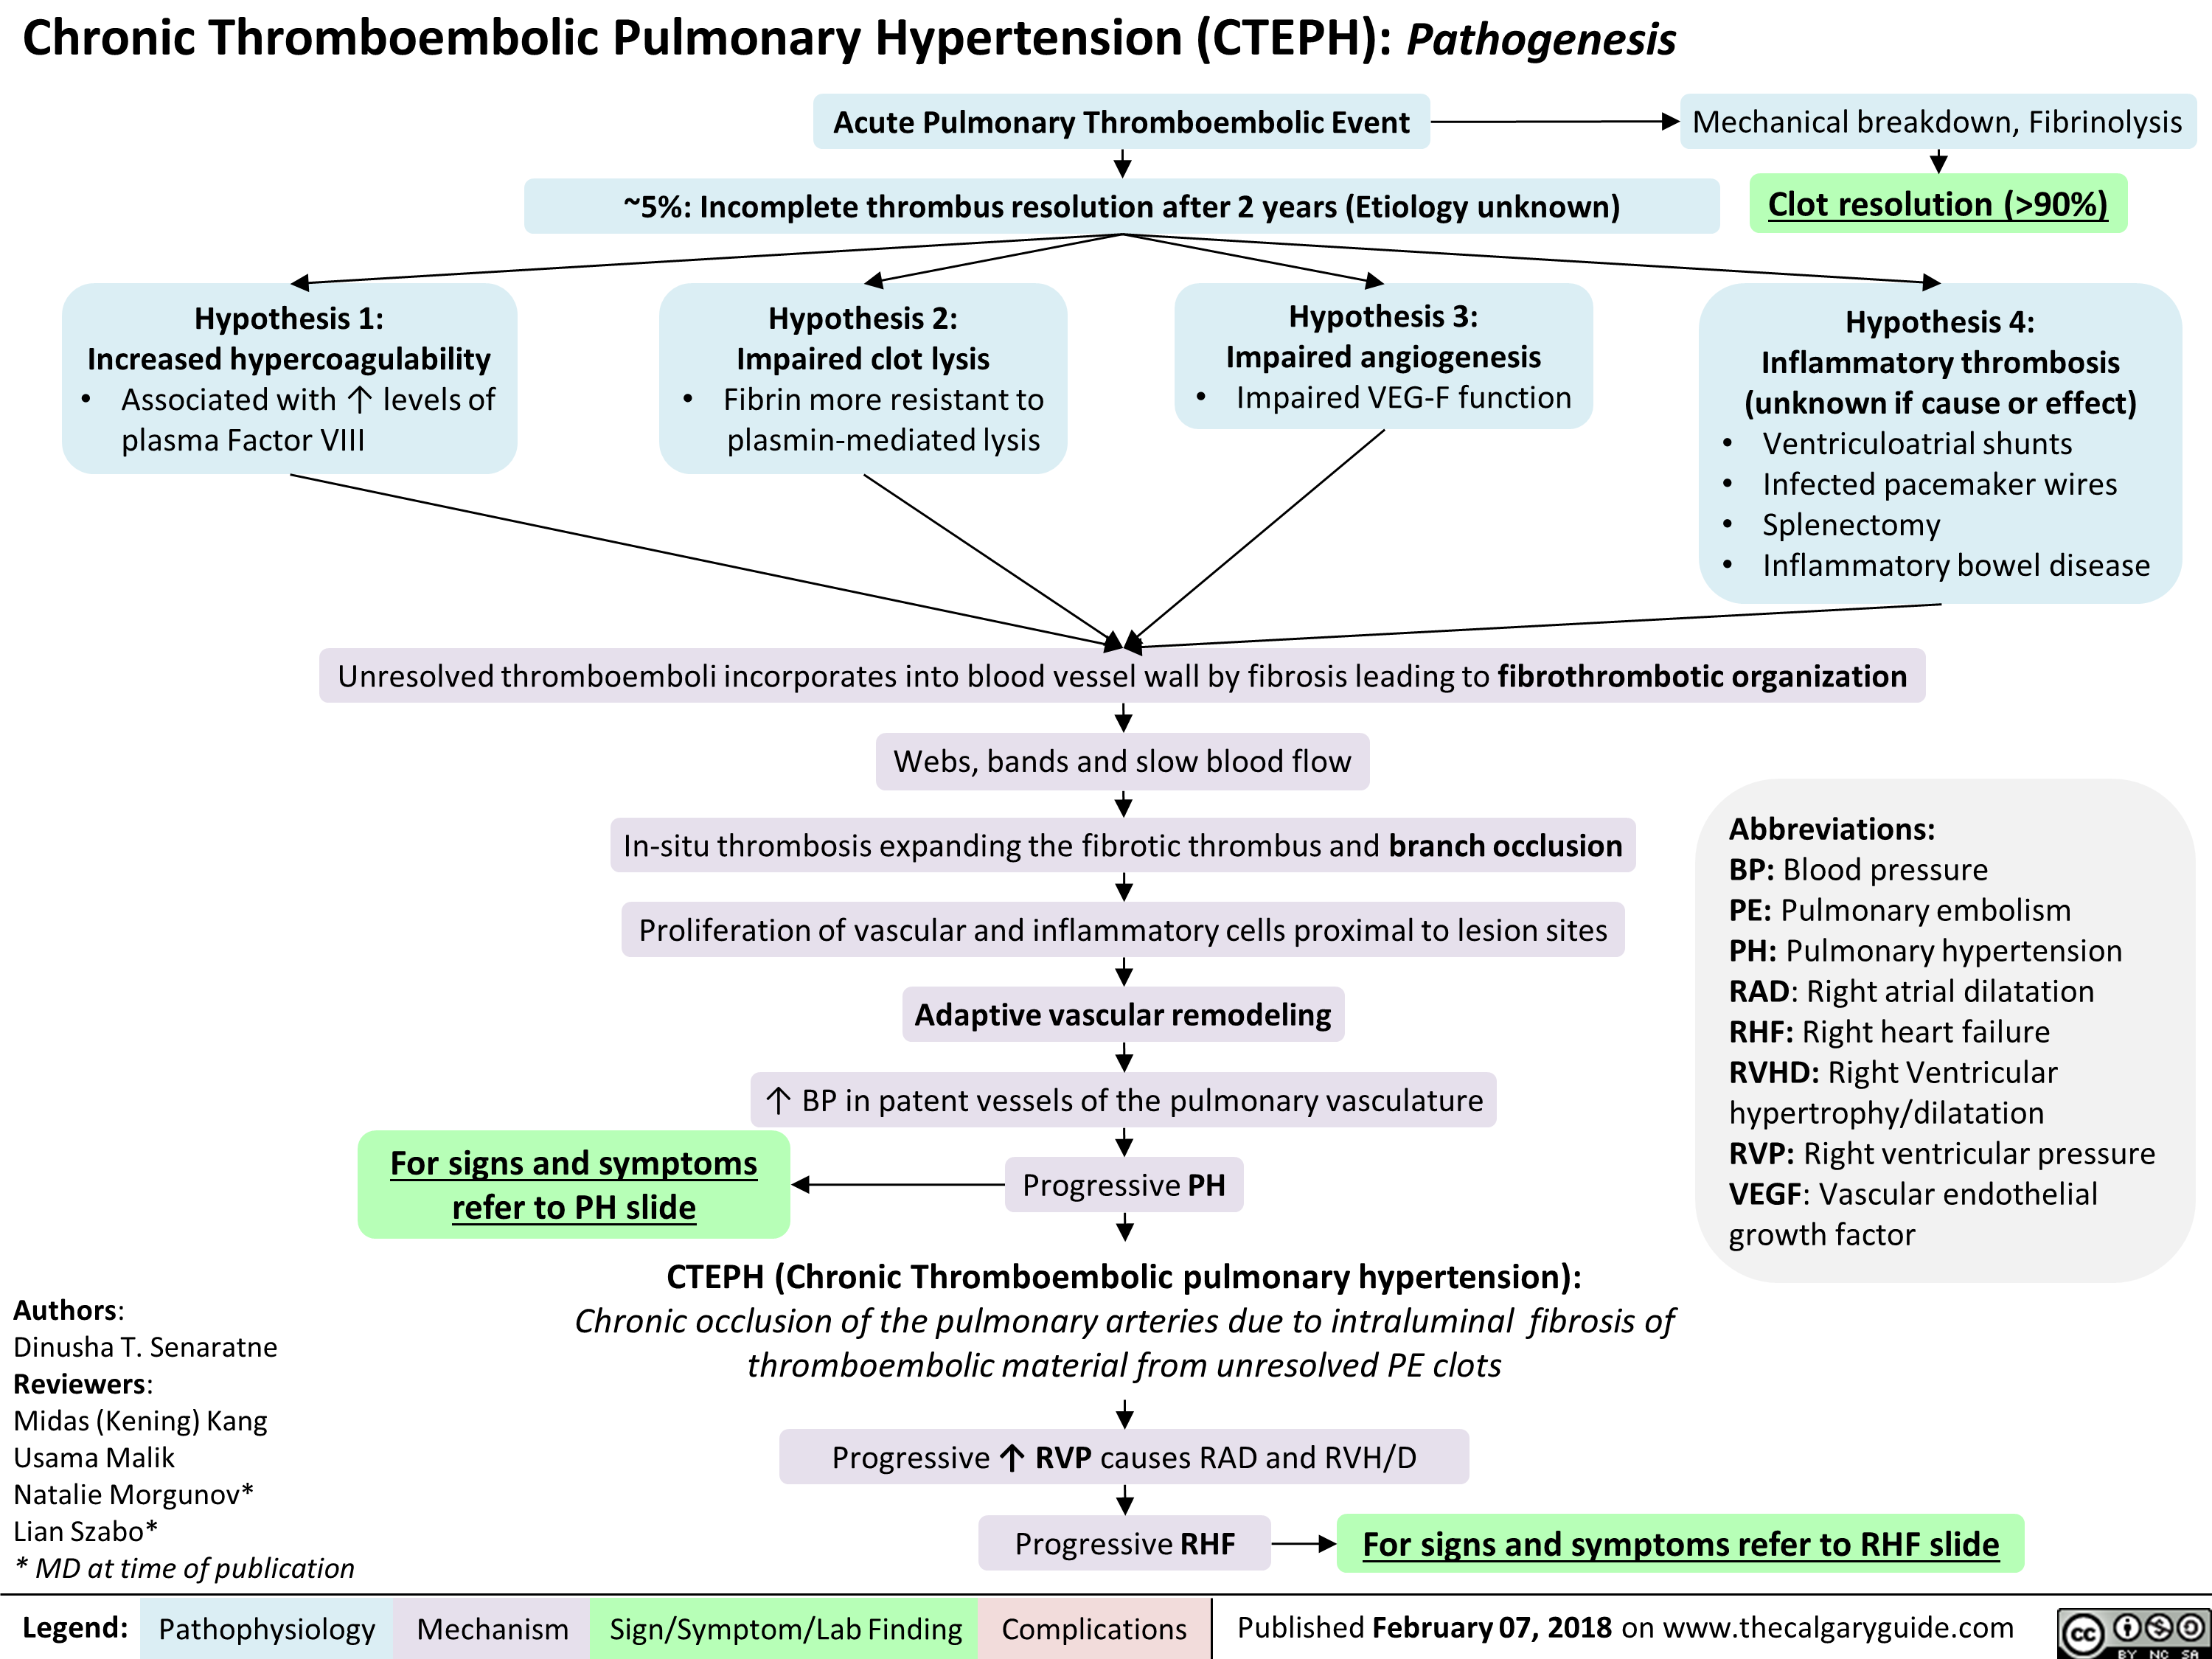 Chronic Thromboembolic Pulmonary Hypertension (CTEPH): Pathogenesis 
Acute Pulmonary Thromboembolic Event 
Mechanical breakdown, Fibrinolysis 
—5%: Incomplete thrombus resolution after 2 years (Etiology unknown) 
* 
Clot resolution (>90%) 
Hypothesis 1: Increased hypercoagulability Hypothesis 2: Impaired clot lysis Hypothesis 3: Impaired angiogenesis Hypothesis 4: Inflammatory thrombosis • Associated with 1` levels of • Fibrin more resistant to • Impaired VEG-F function (unknown if cause or effect) plasma Factor VIII plasmin-mediated lysis • Ventriculoatrial shunts • Infected pacemaker wires • Splenectomy • Inflammatory bowel disease 
Unresolved thromboemboli incorporates into blood vessel wall by fibrosis leading to fibrothrombotic organization 
Authors: Dinusha T. Senaratne Reviewers: Midas (Kening) Kang Usama Malik Natalie Morgunov* Lian Szabo* * MD at time of publication 
Legend: 
Webs, bands and slow blood flow In-situ thrombosis expanding the fibrotic thrombus and branch occlusion Abbreviations: BP: Blood pressure PE: Pulmonary embolism PH: Pulmonary hypertension RAD: Right atrial dilatation RHF: Right heart failure RVHD: Right Ventricular hypertrophy/dilatation RVP: Right ventricular pressure VEGF: Vascular endothelial growth factor Proliferation of vascular and inflammatory cells proximal to lesion sites Adaptive vascular remodeling BP in patent vessels of the pulmonary vasculature For signs and symptoms refer to PH slide ■ Progressive PH 
CTEPH (Chronic Thromboembolic pulmonary hypertension): Chronic occlusion of the pulmonary arteries due to intraluminal fibrosis of thromboembolic material from unresolved PE clots 
Pathophysiology Mechanism 
Progressive'(` RVP causes RAD and RVH/D 
Sign/Symptom/Lab Finding 
Progressive RHF 
Complications 
For signs and symptoms refer to RHF slide 